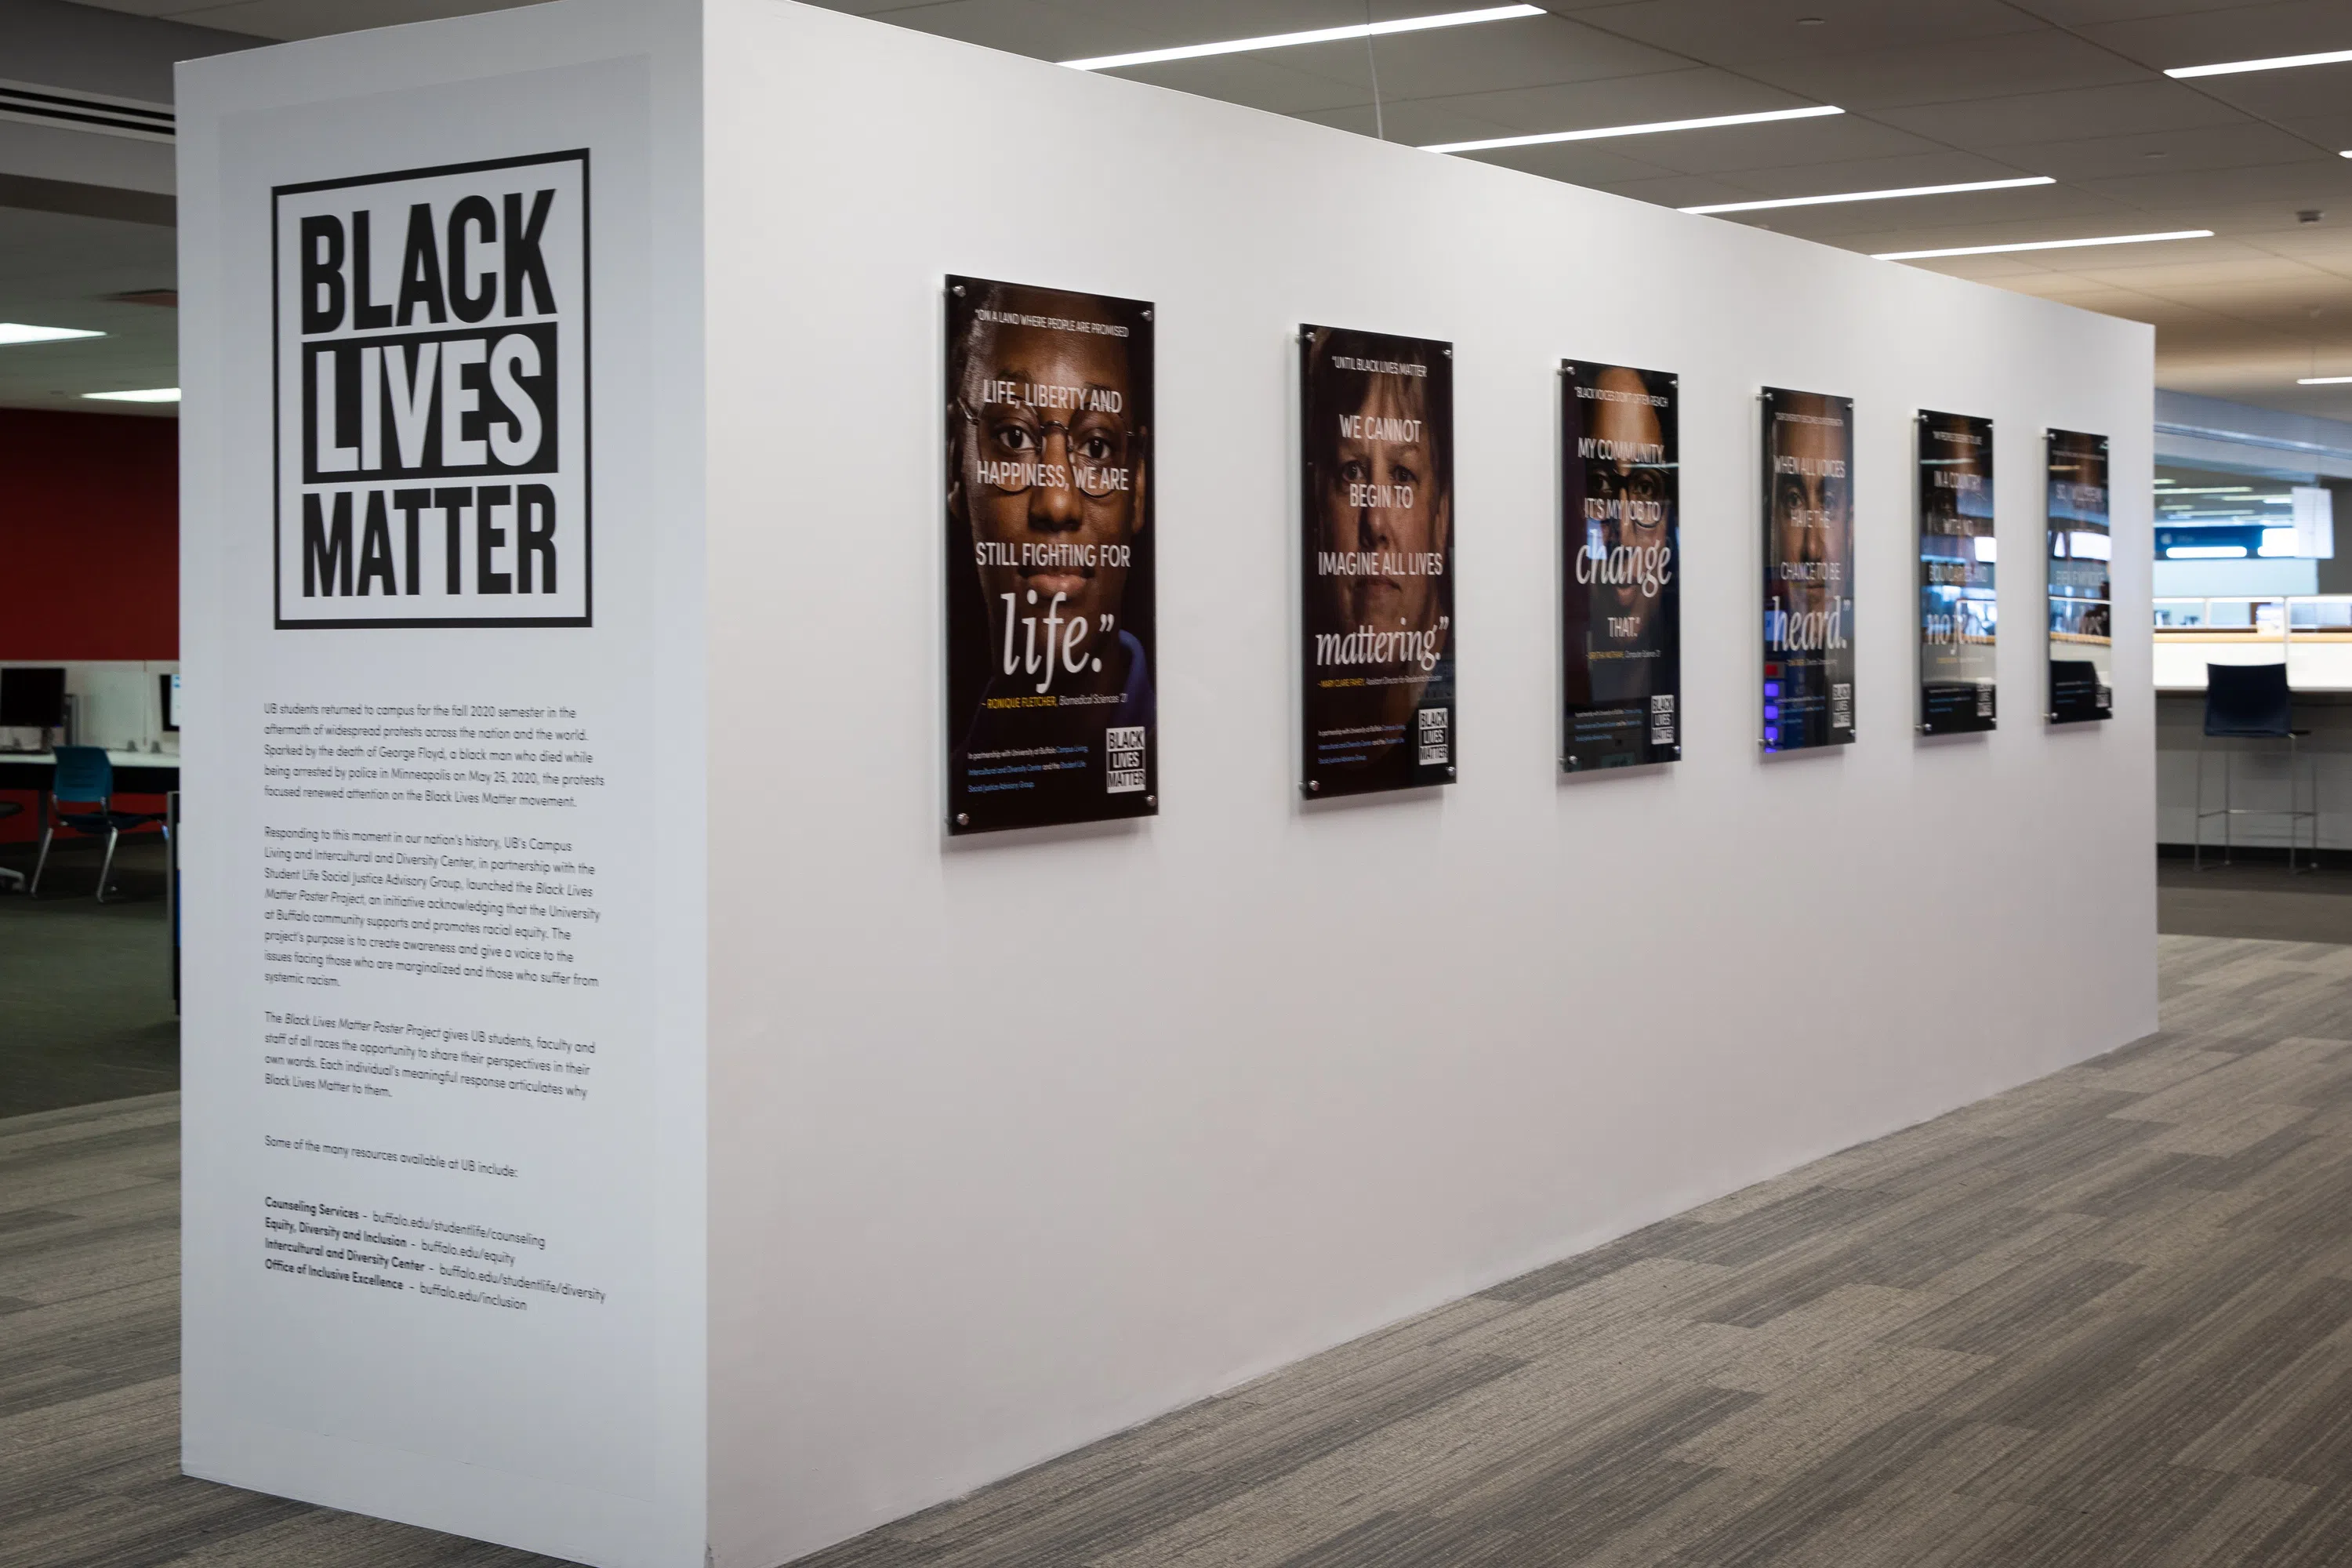 A photo of the Black Lives Matter poster project in the Silverman Library. This exhibit aims to expand understanding of what it means to be Black in America.